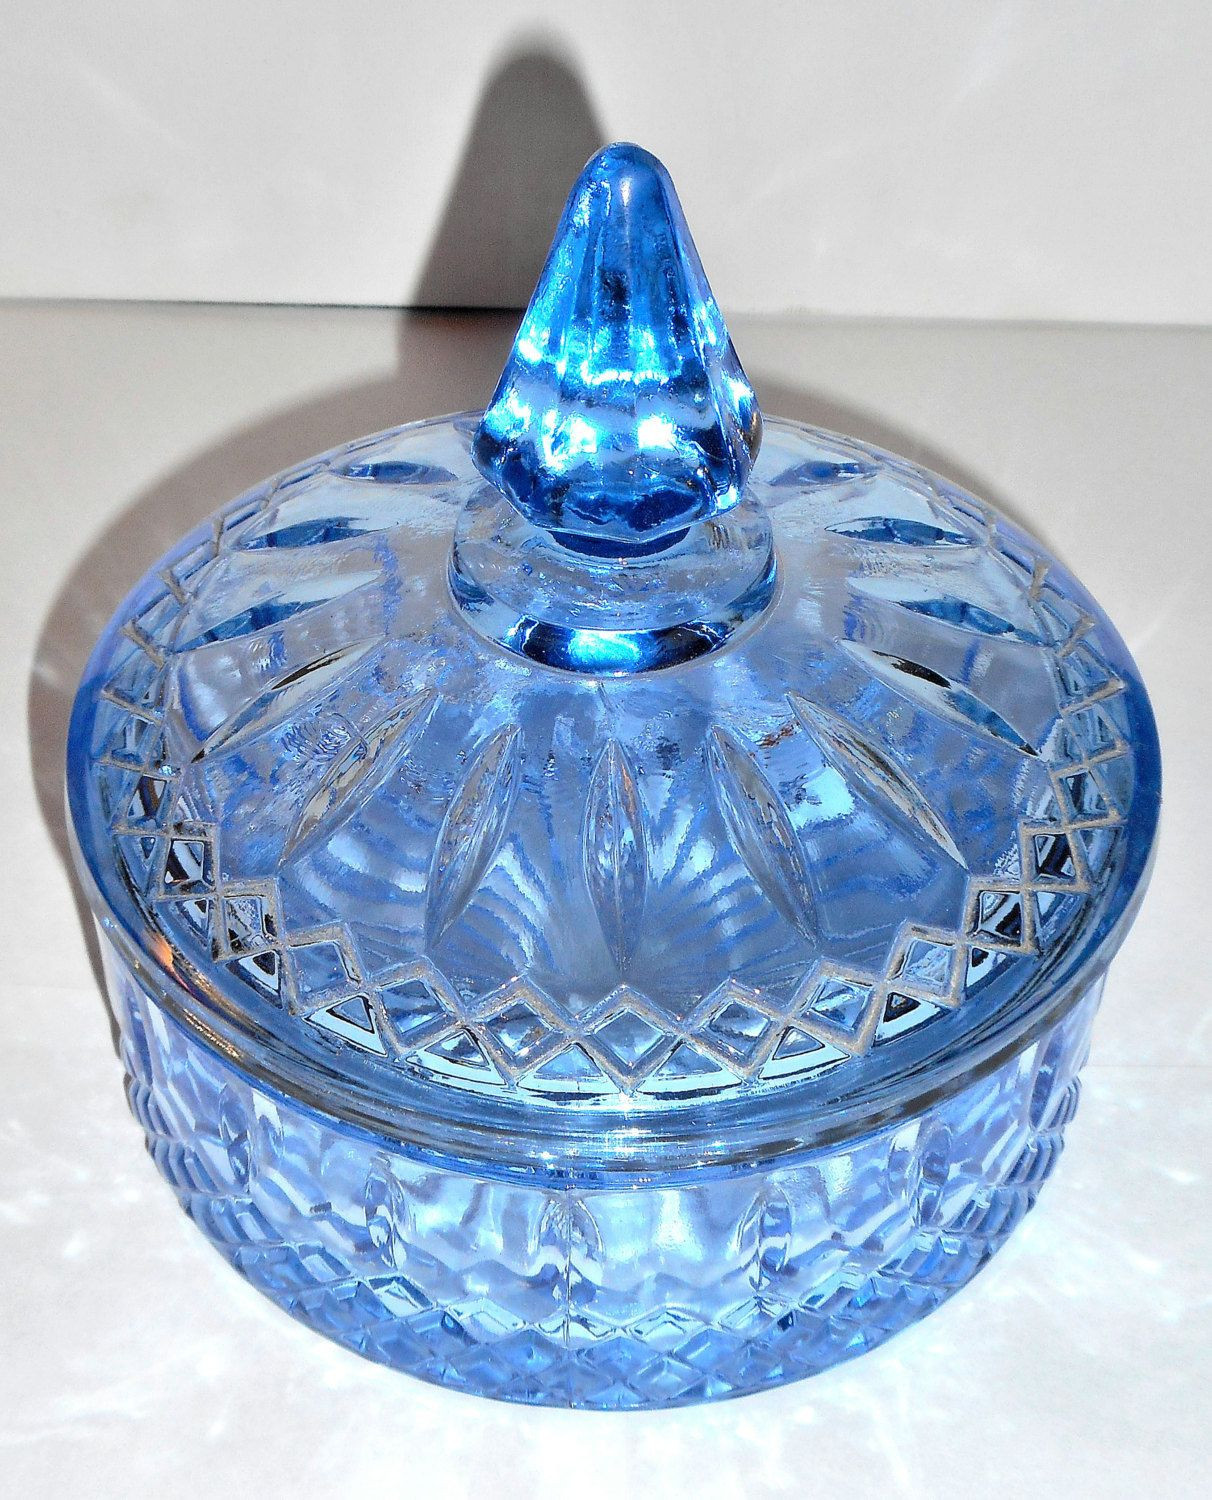 fenton cobalt blue hobnail vase of blue glass dish pics cobalt blue glass hobnail shoe candy nut dish pertaining to blue glass dish stock vintage princess blue candy dish by indiana glass vintage of blue glass